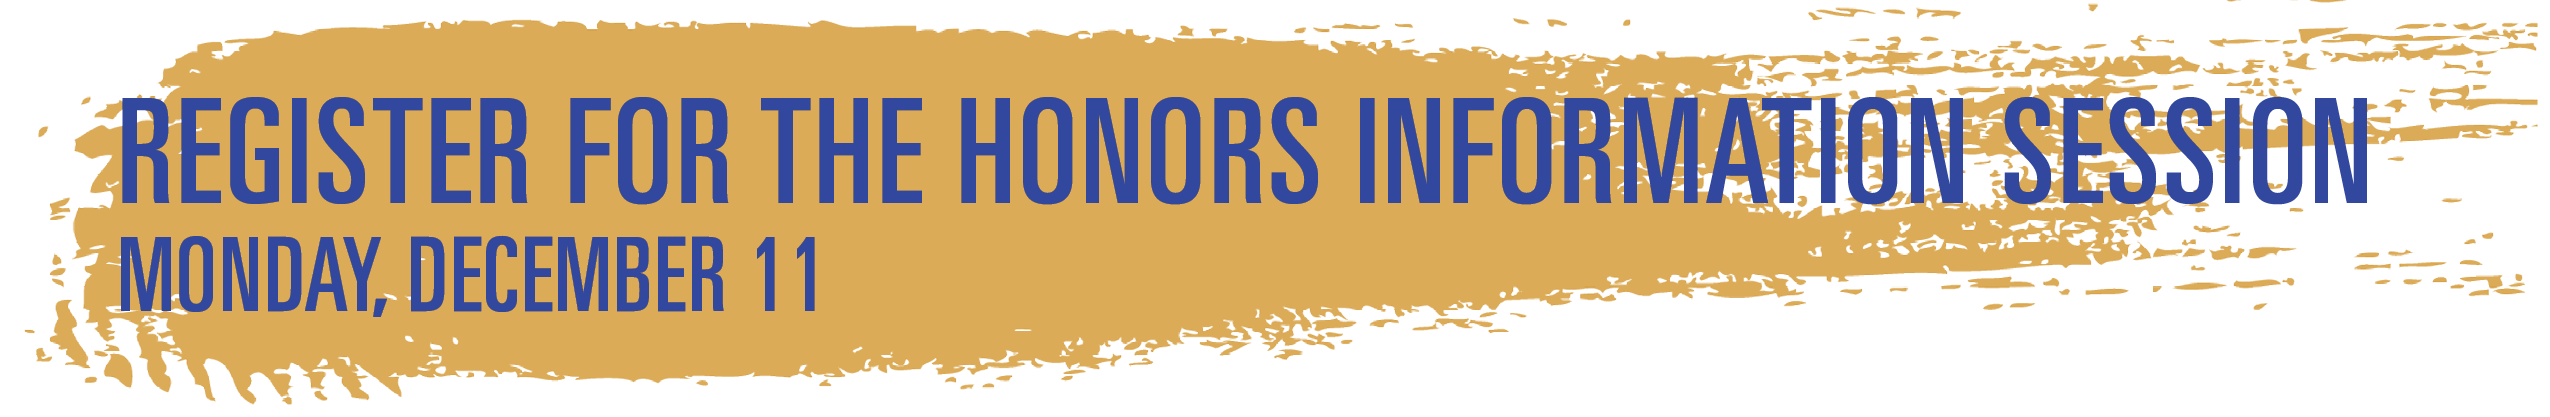 Register for the Honors Information Session - Monday, December 11